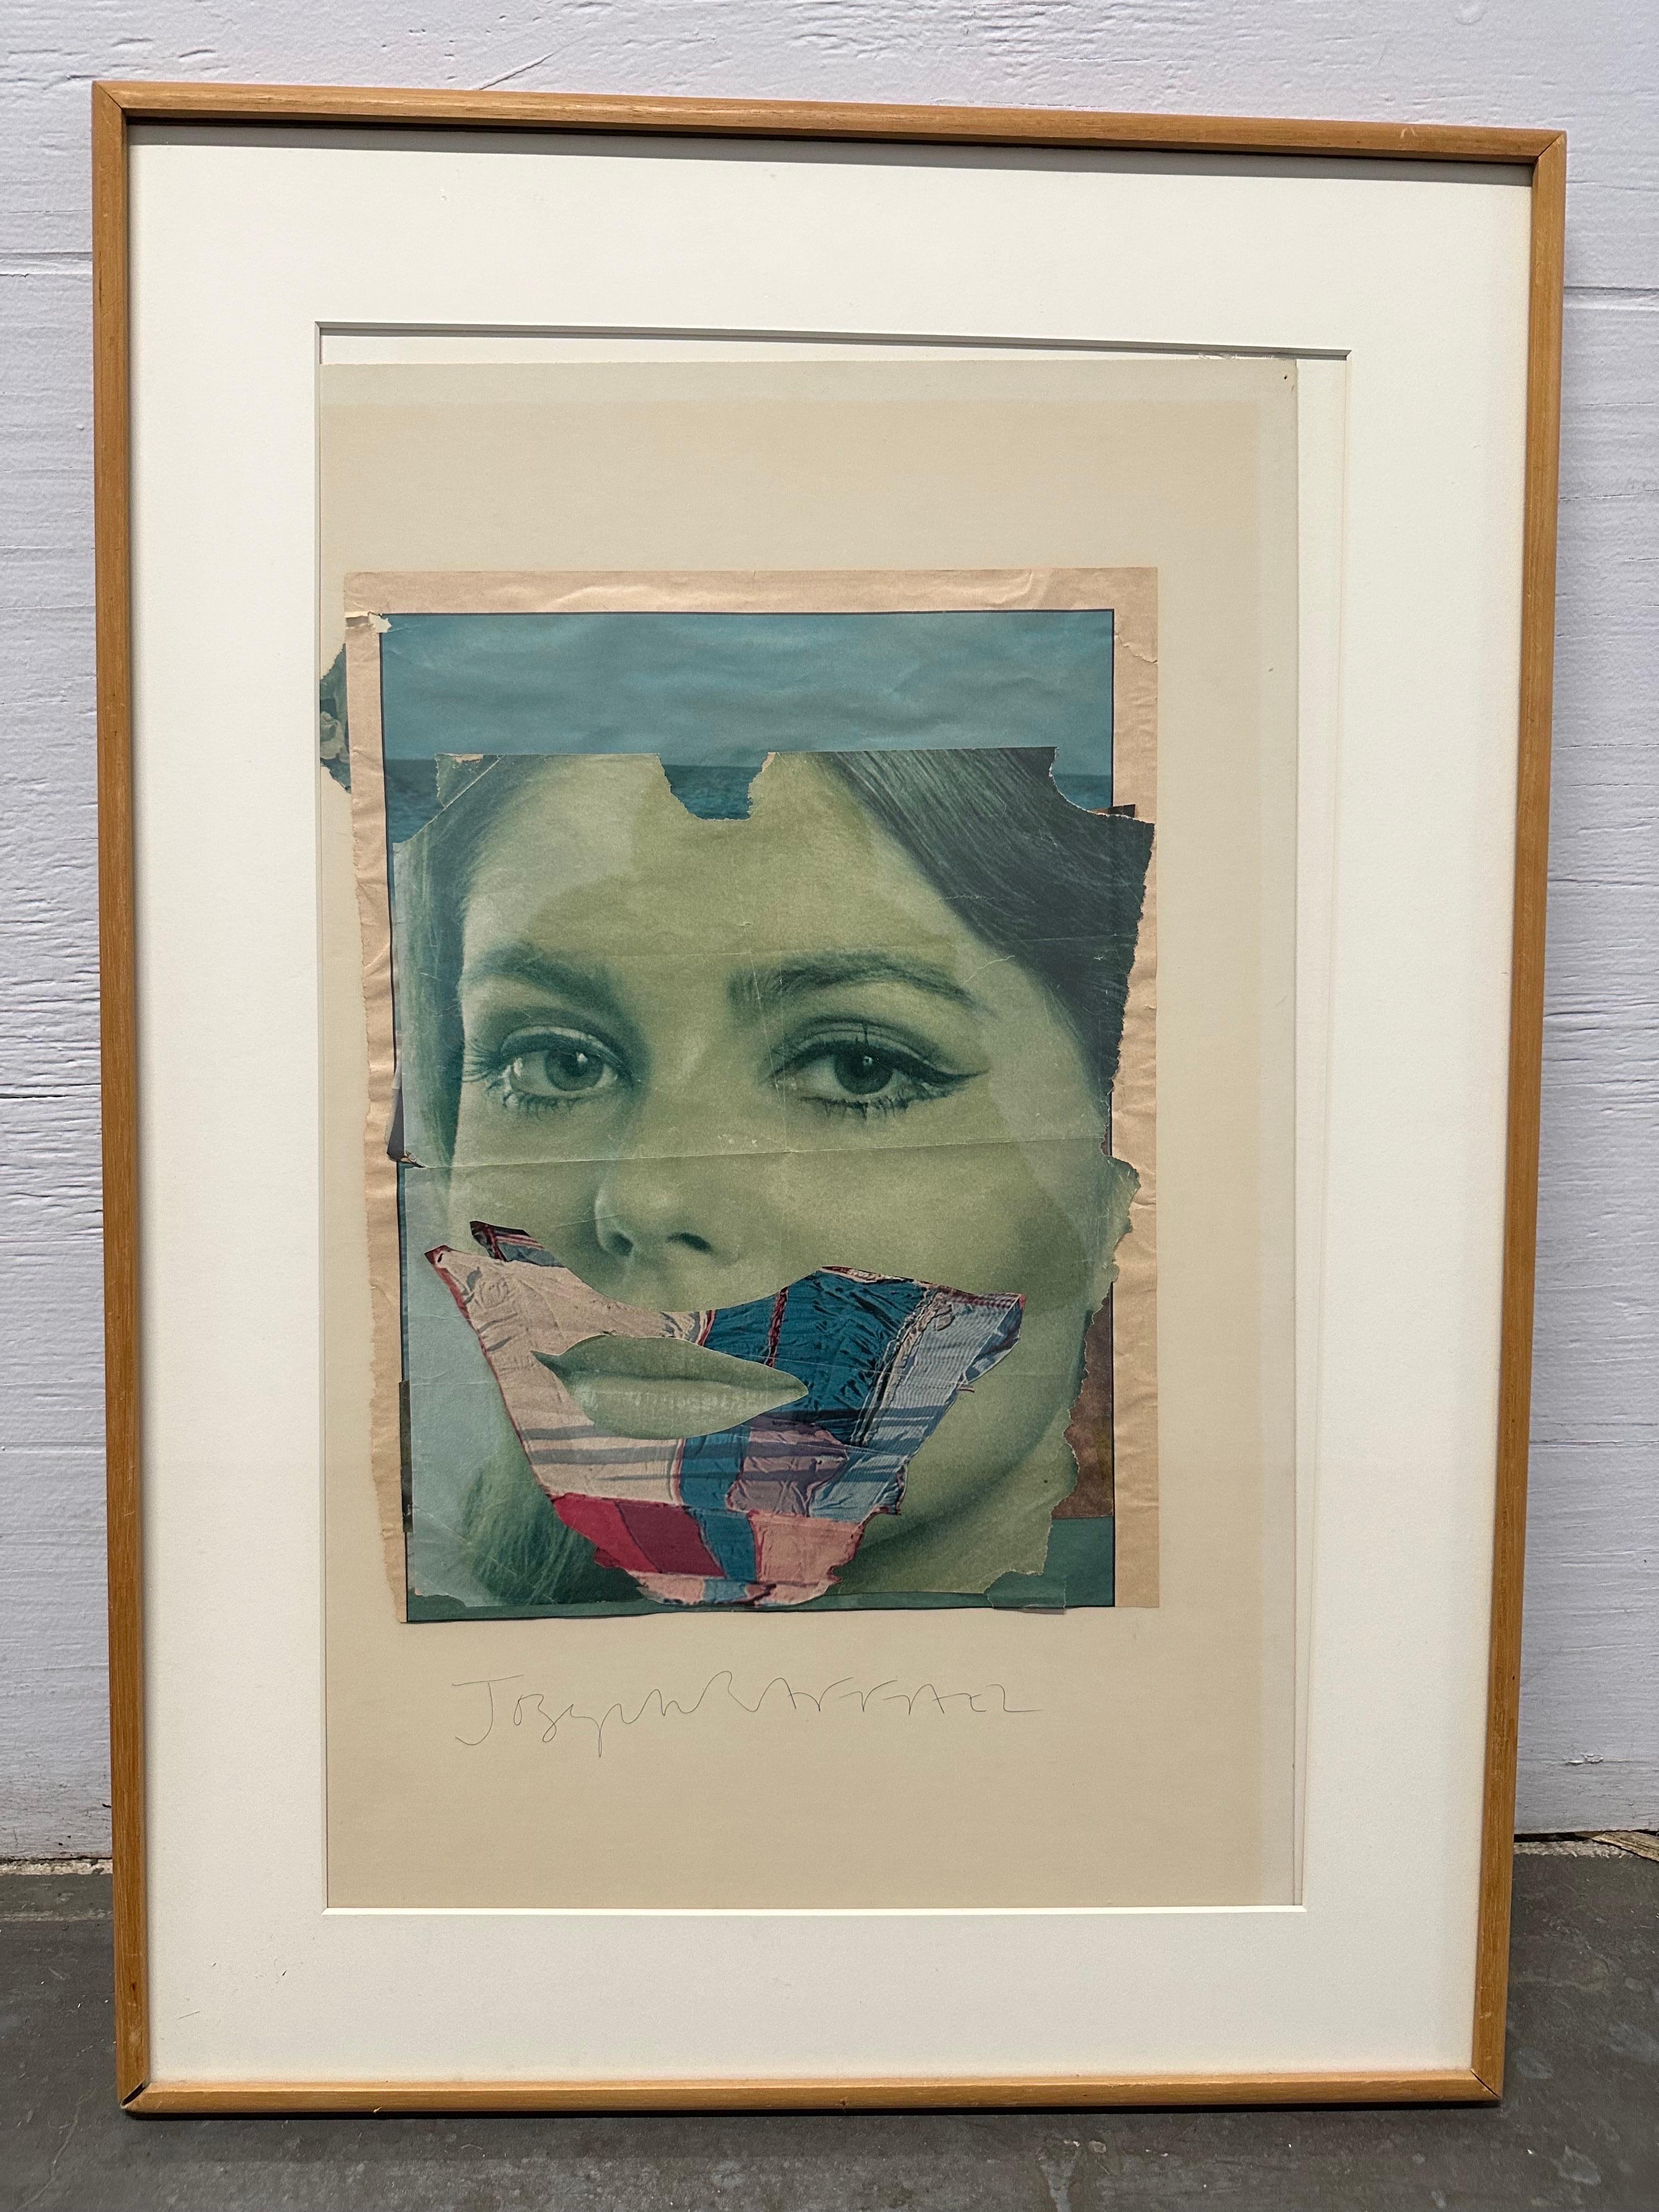 Joseph Raffael (NYC, 1933-2021), Surrealist Portrait of a Woman, collaged magazine photographs assembled on cardboard, pencil signed lower margins, matted and wood slat framed under glass, 13.5